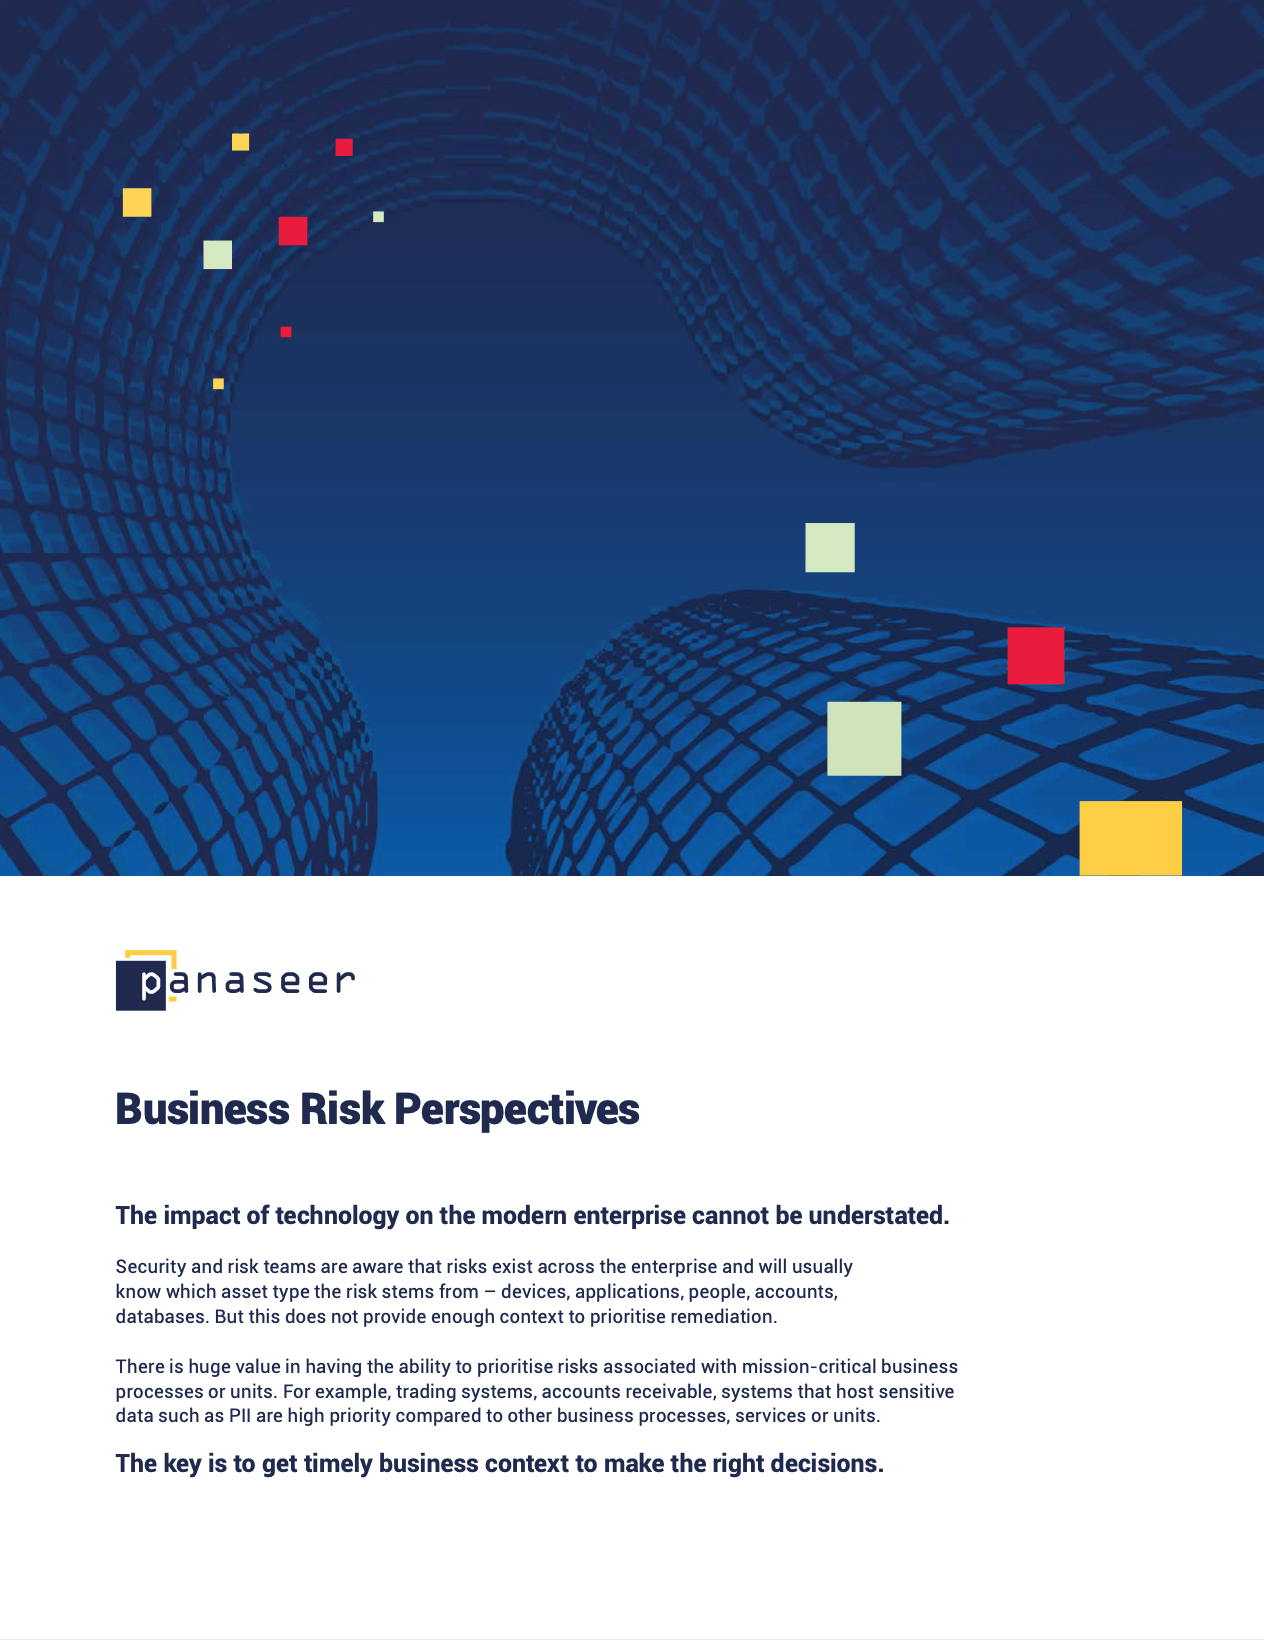 Business Risk Perspectives Overview